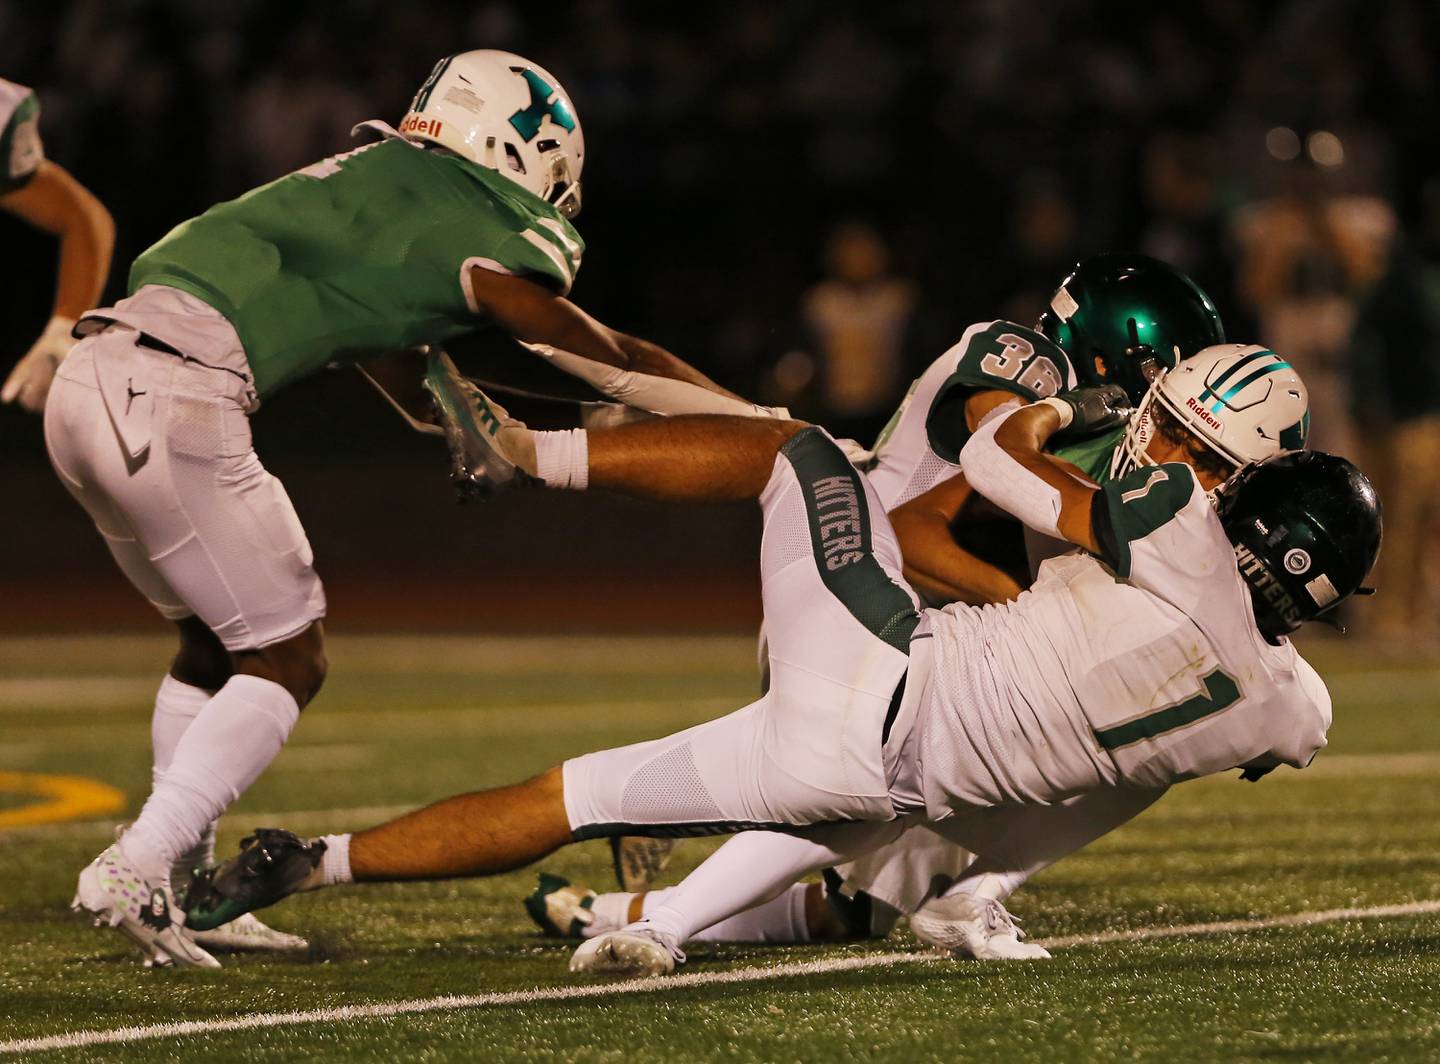 York's Matt Vezza (9) is tackled by Glenbard West's Michael Short (1) during the boys varsity football game between York and Glenbard West on Friday, Sept. 30, 2022 in Elmhurst, IL.